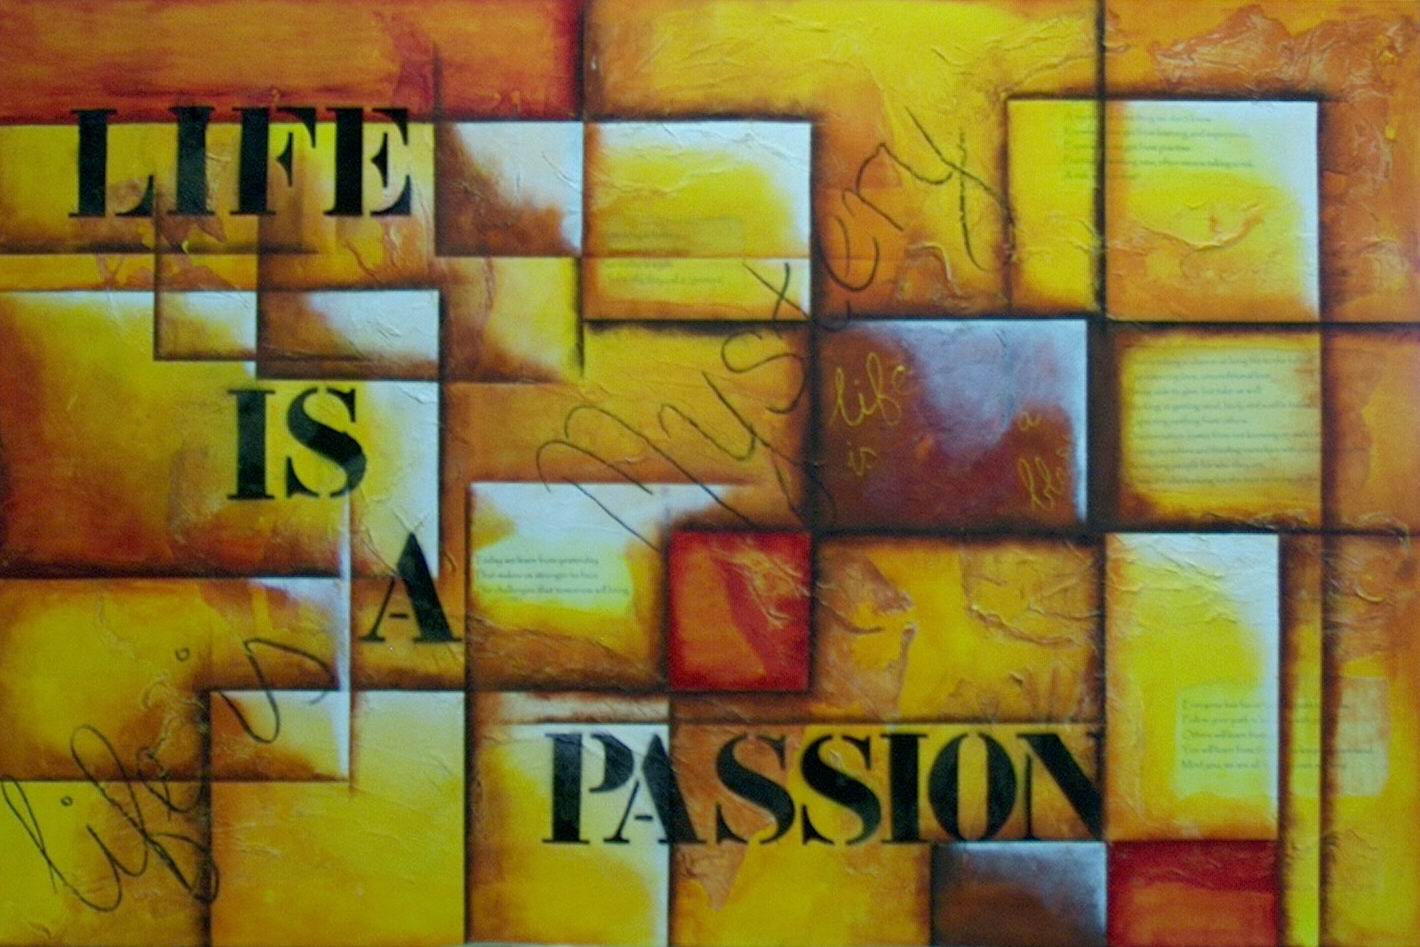 Life is a passion - kunstigart.nl